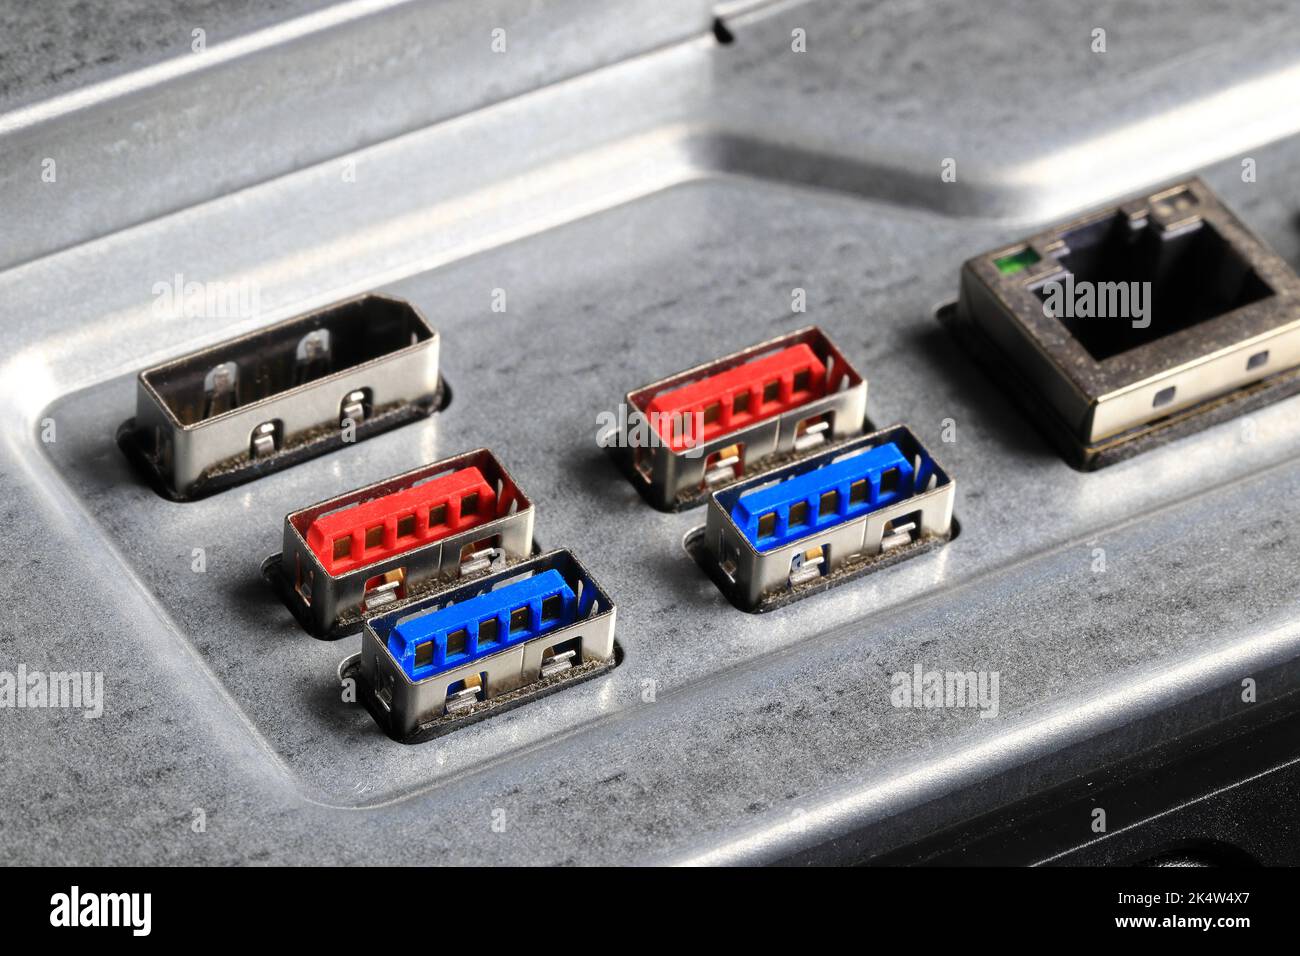 Multiple ports on computer show with USB, LAN, Display port. Stock Photo